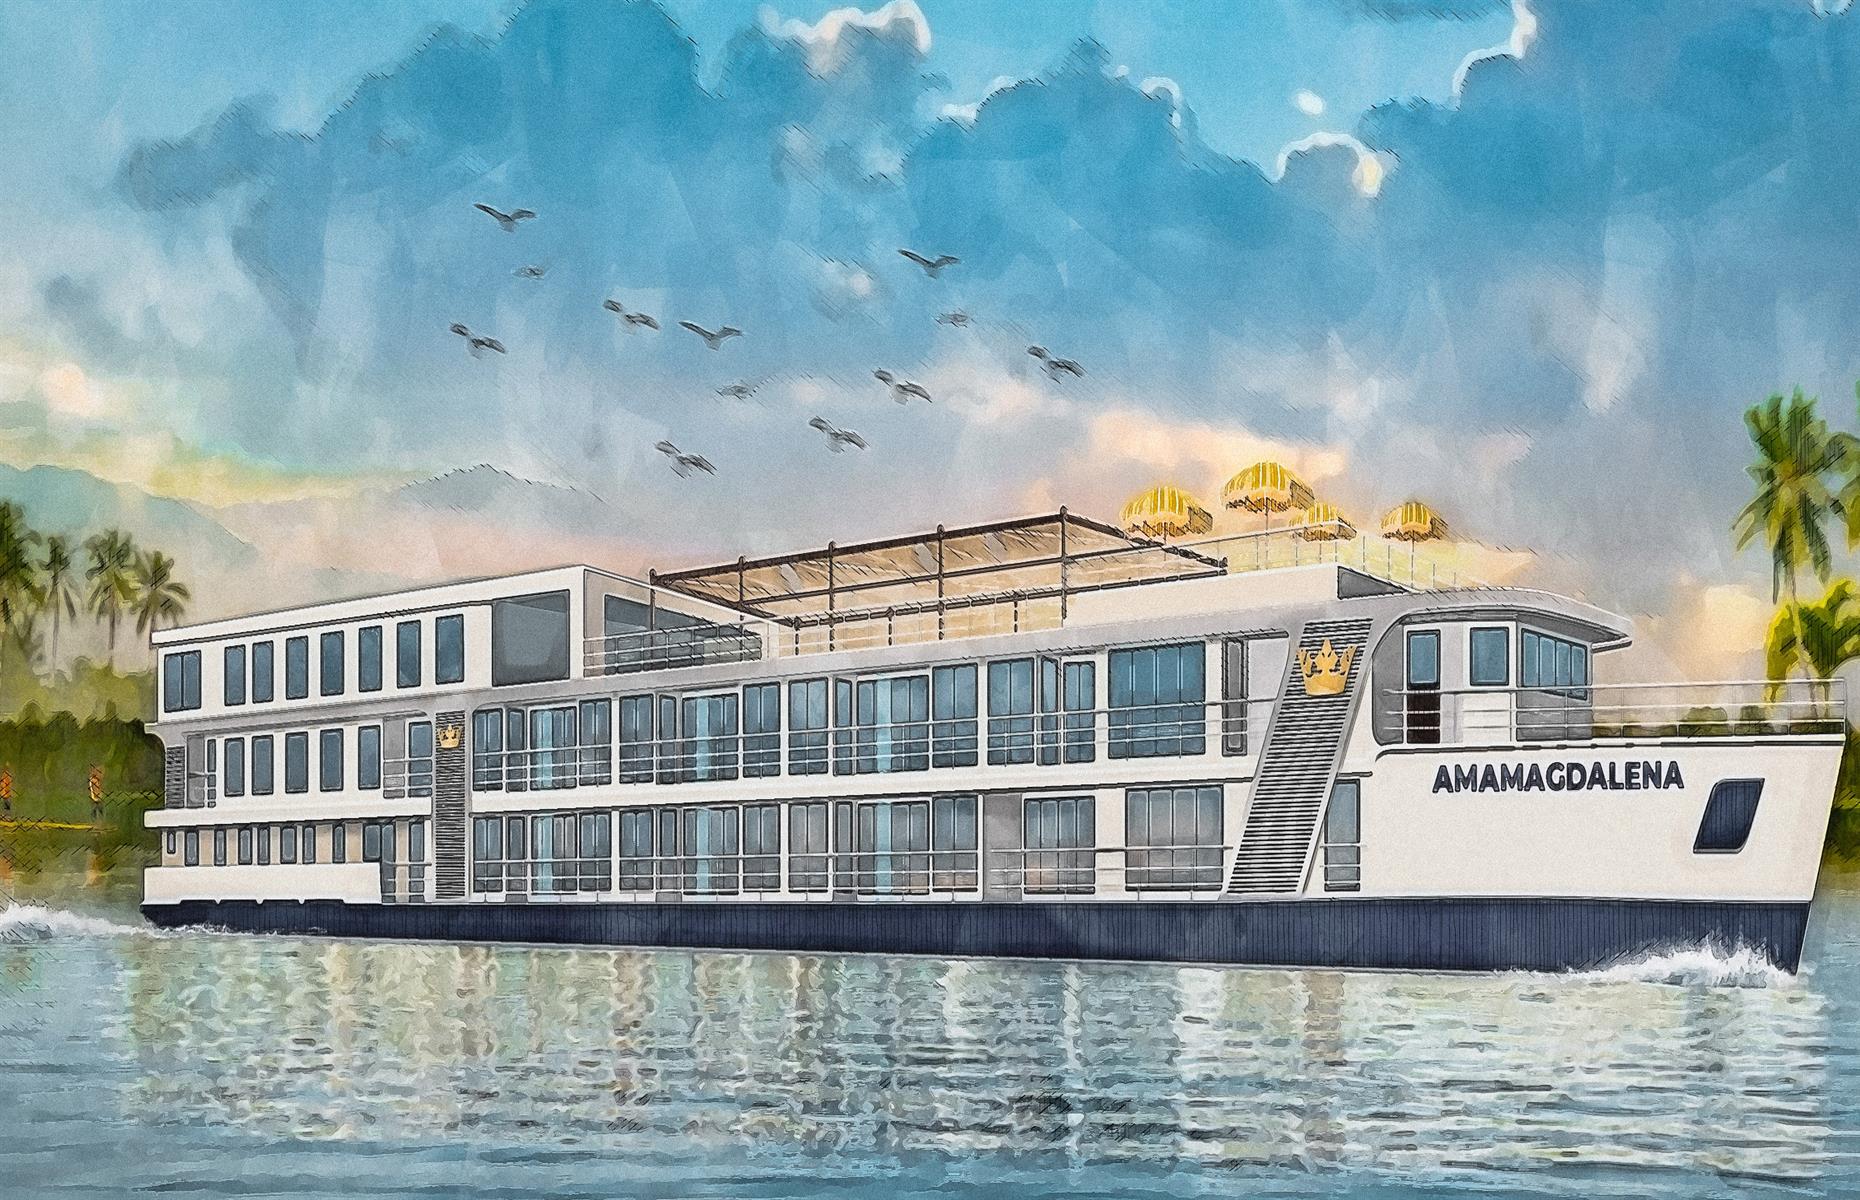 <p>Although AmaMagdalena will have just 30 staterooms, there’ll be no shortage of space – all will have a twin balcony design, and will measure between 237 and 516 square feet (22sqm and 48sqm respectively). Amenities include the whirlpool (located on the ship’s sundeck) and a large fitness room, while the main restaurant will specialise in Western and Latin American cuisine.</p>